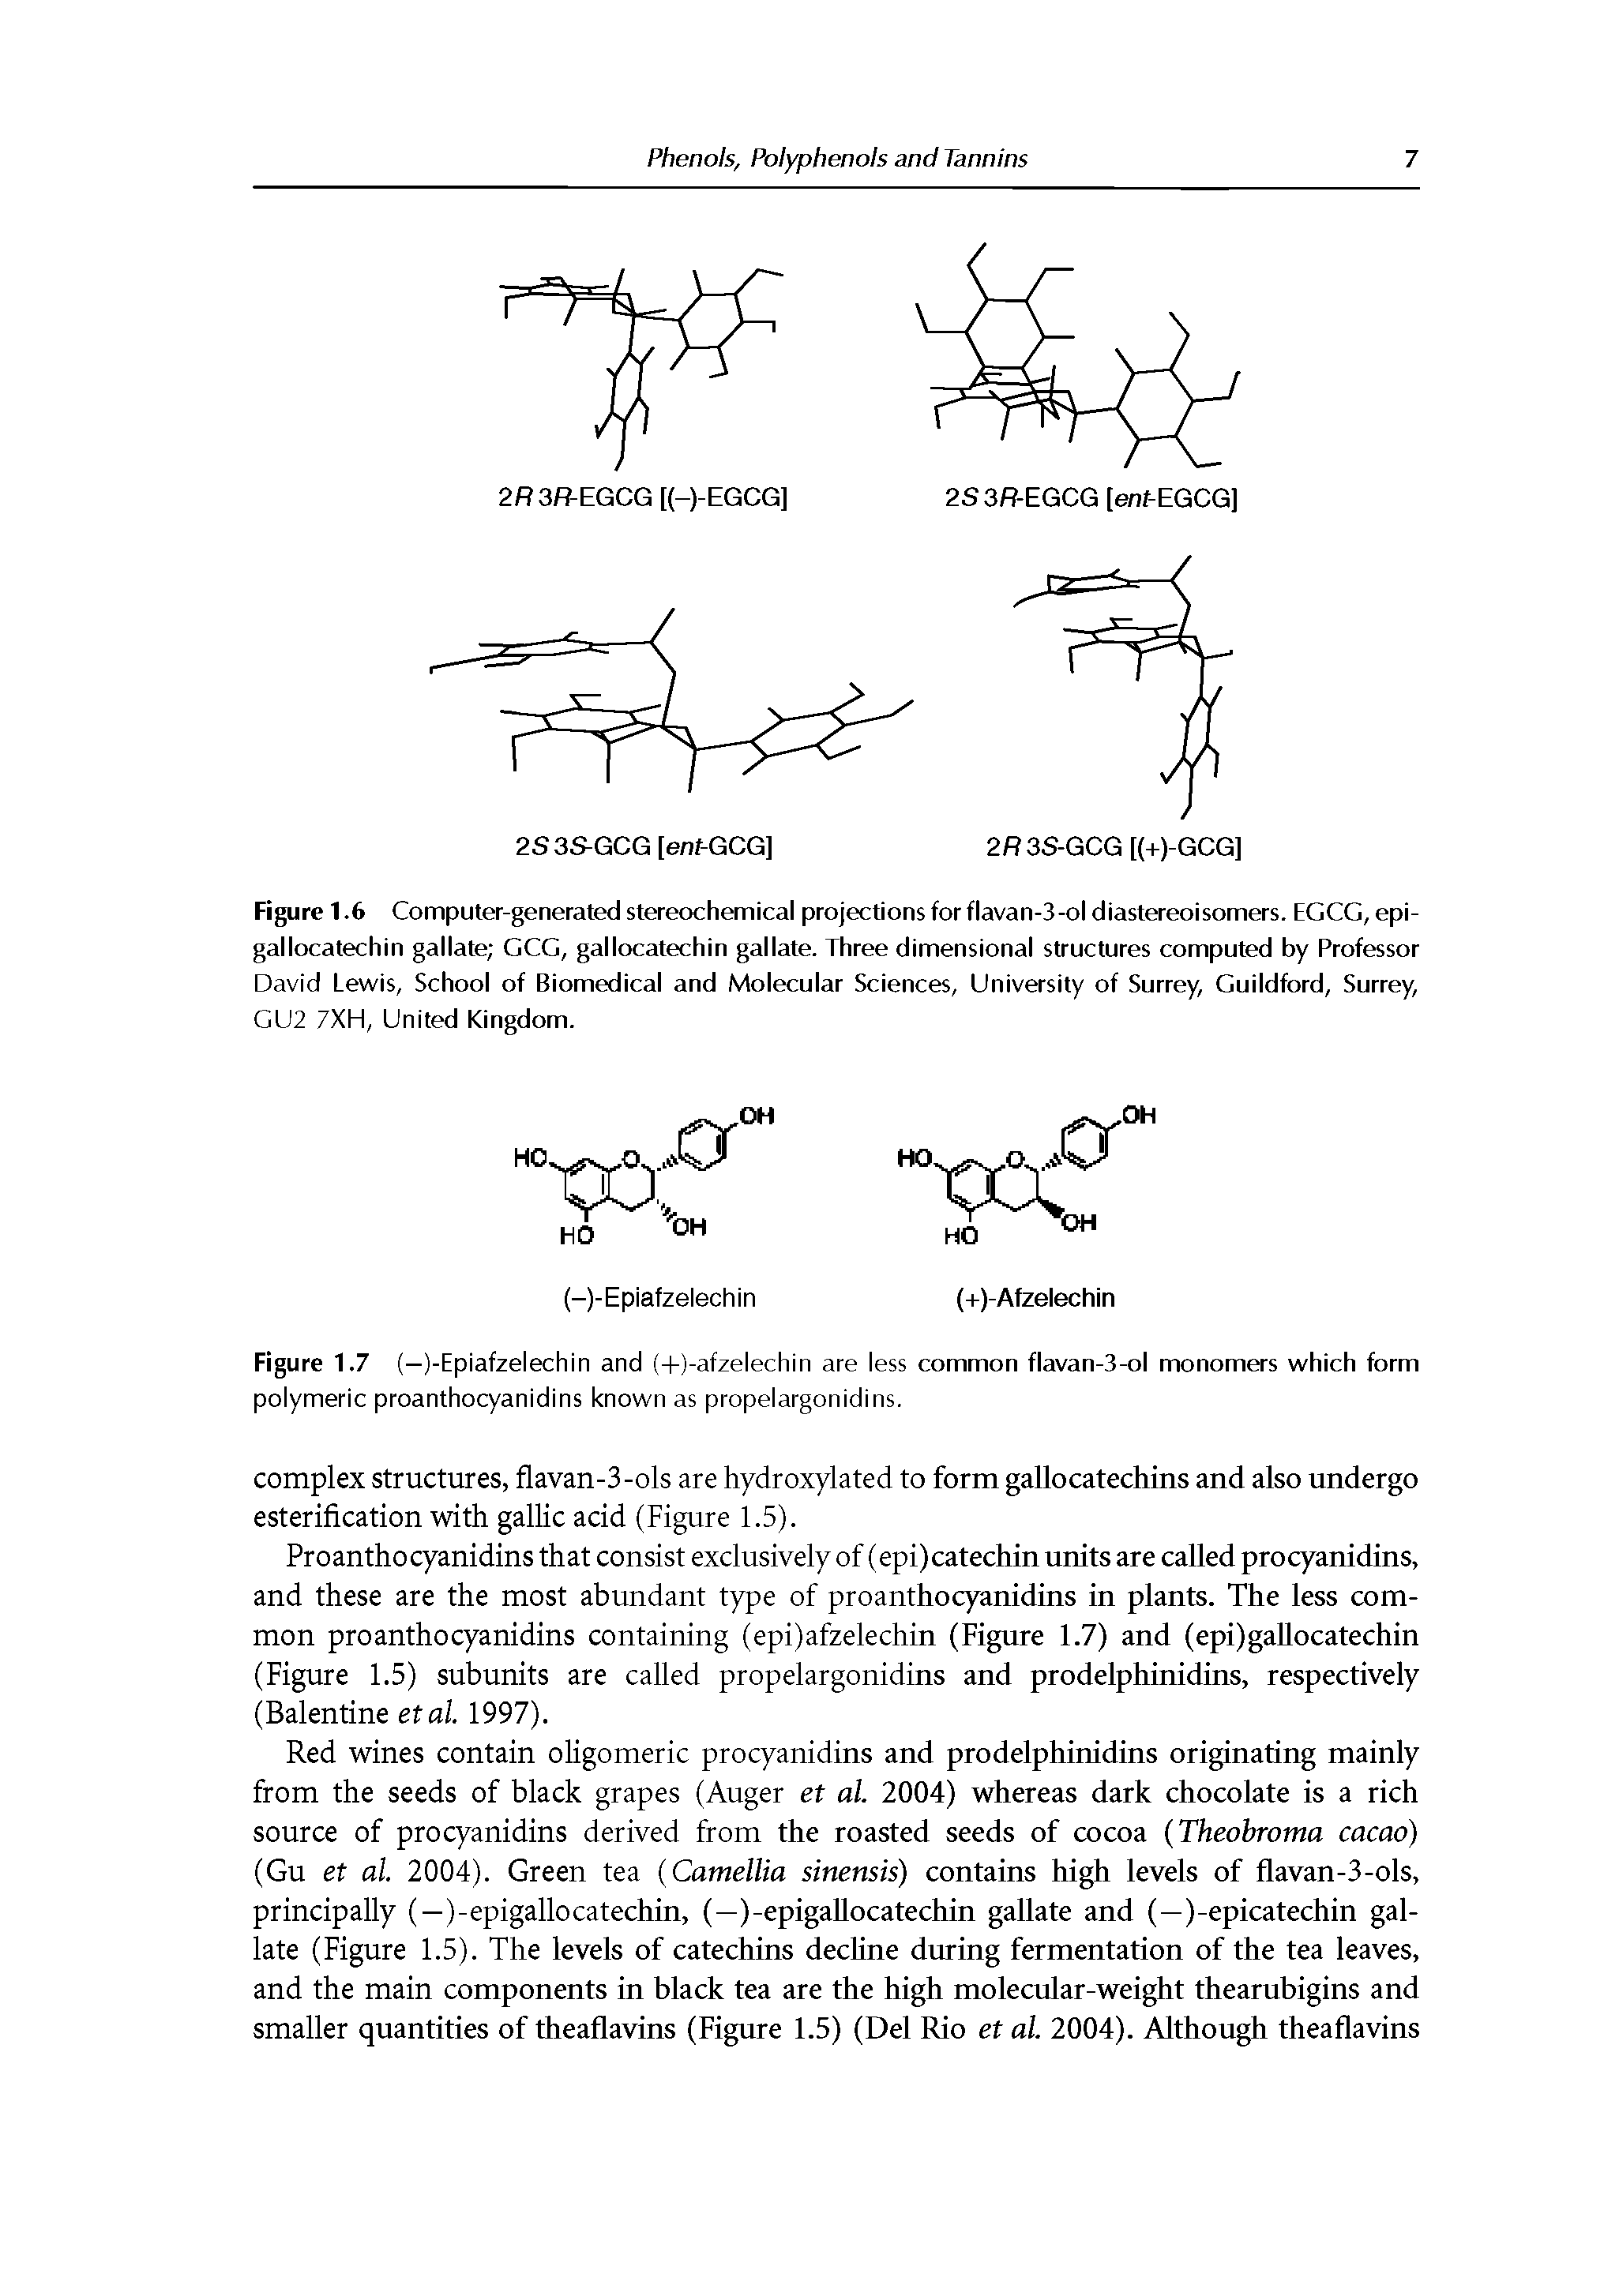 Figure 1.6 Computer-generated stereochemical projections for flavan-3-ol diastereoisomers. EGCG, epi-gallocatechin gallate GCG, gallocatechin gallate. Three dimensional structures computed by Professor David Lewis, School of Biomedical and Molecular Sciences, University of Surrey, Guildford, Surrey, GU2 7XH, United Kingdom.